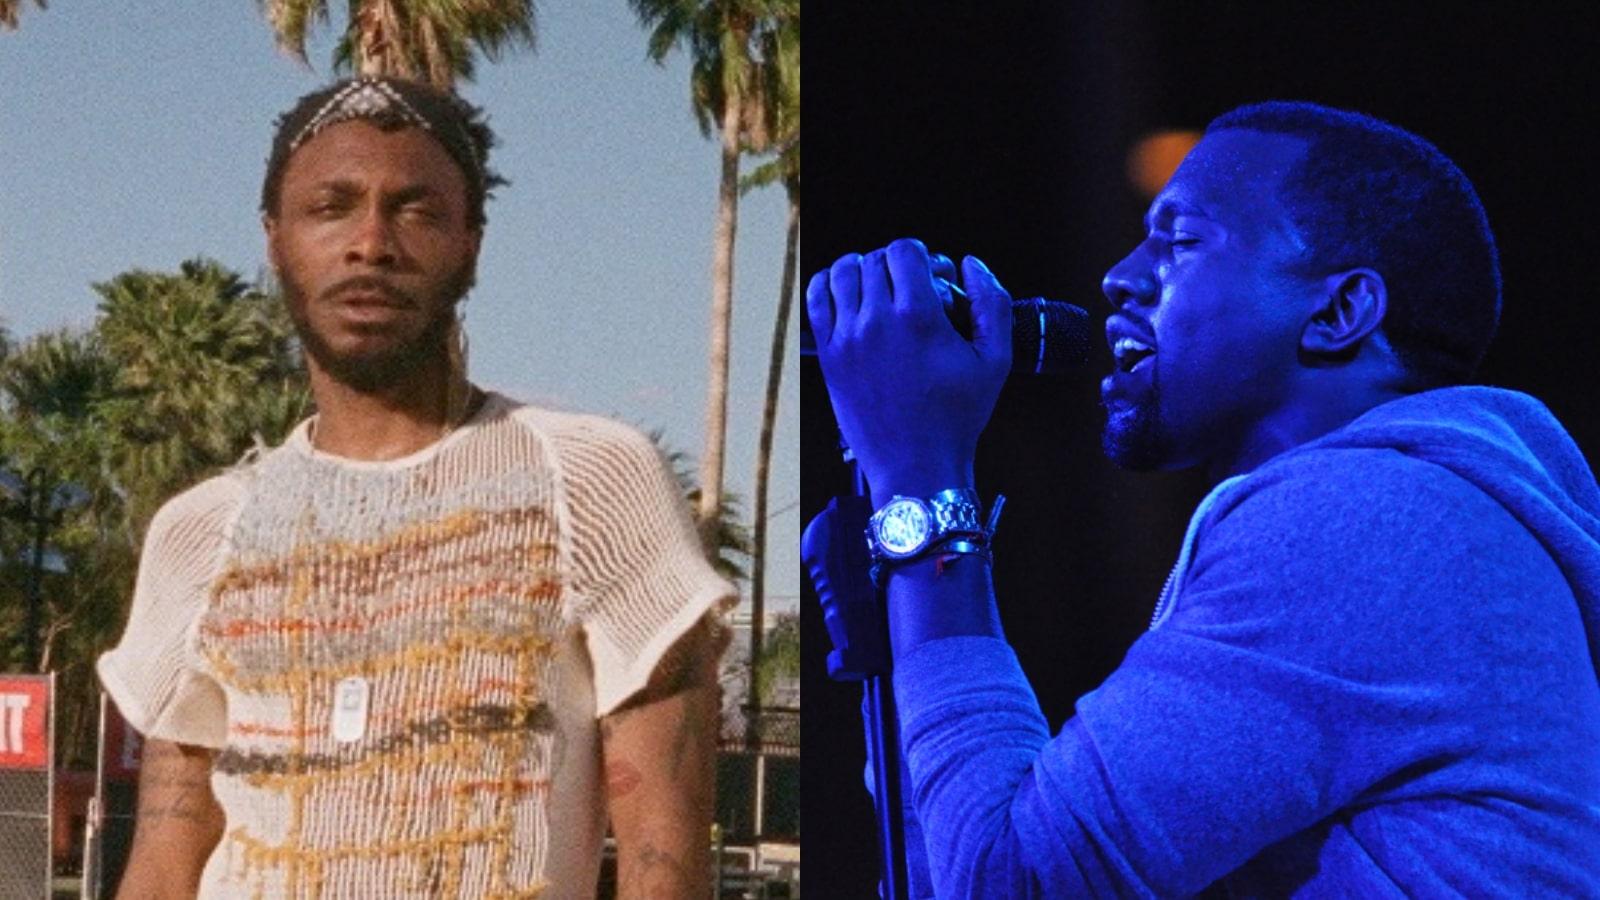 JPEGMAFIA and Kanye West in side-by-side photo